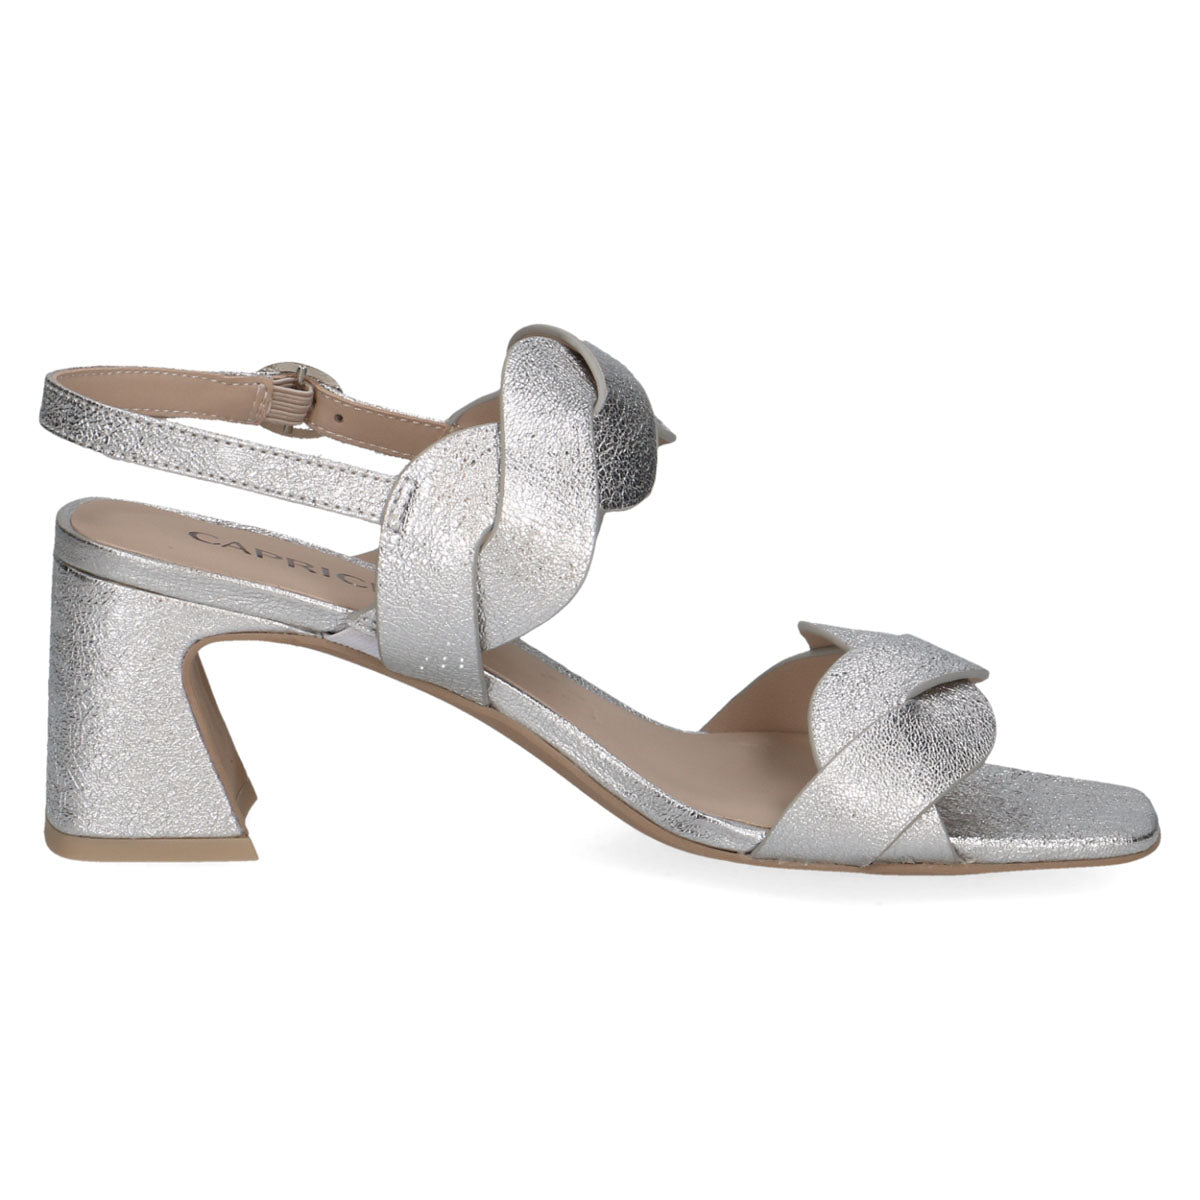 Top view of the sandal, focusing on the metallic finish and elegant square toe.